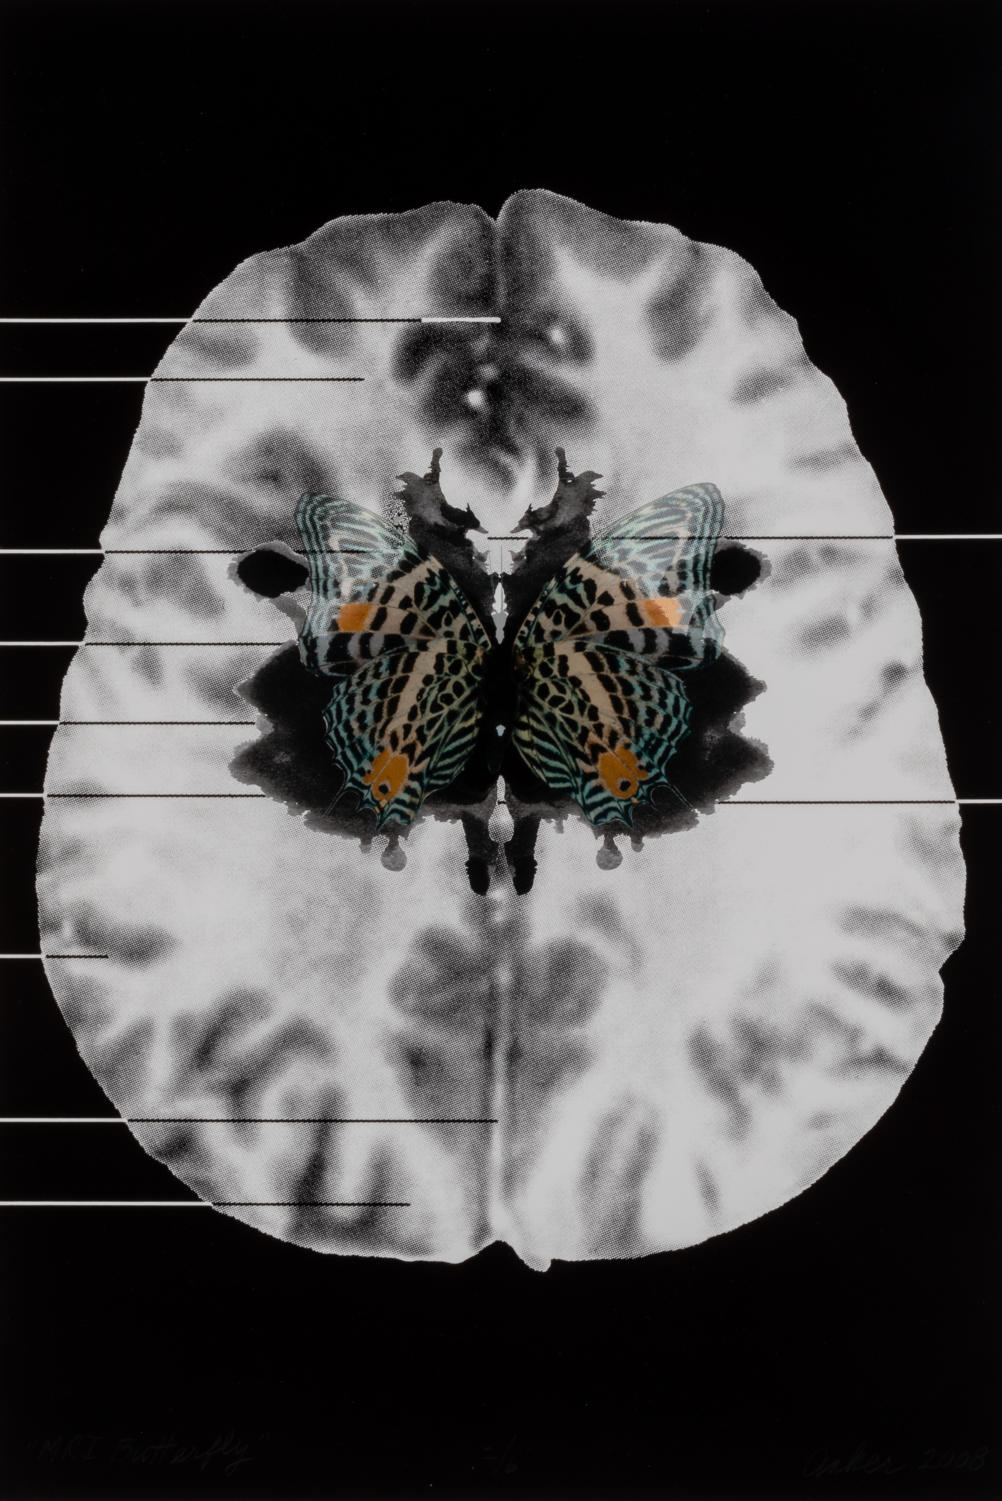 Suzanne Anker, MRI Butterfly (5) (2008). Inkjet print on watercolor paper, edition of 6.